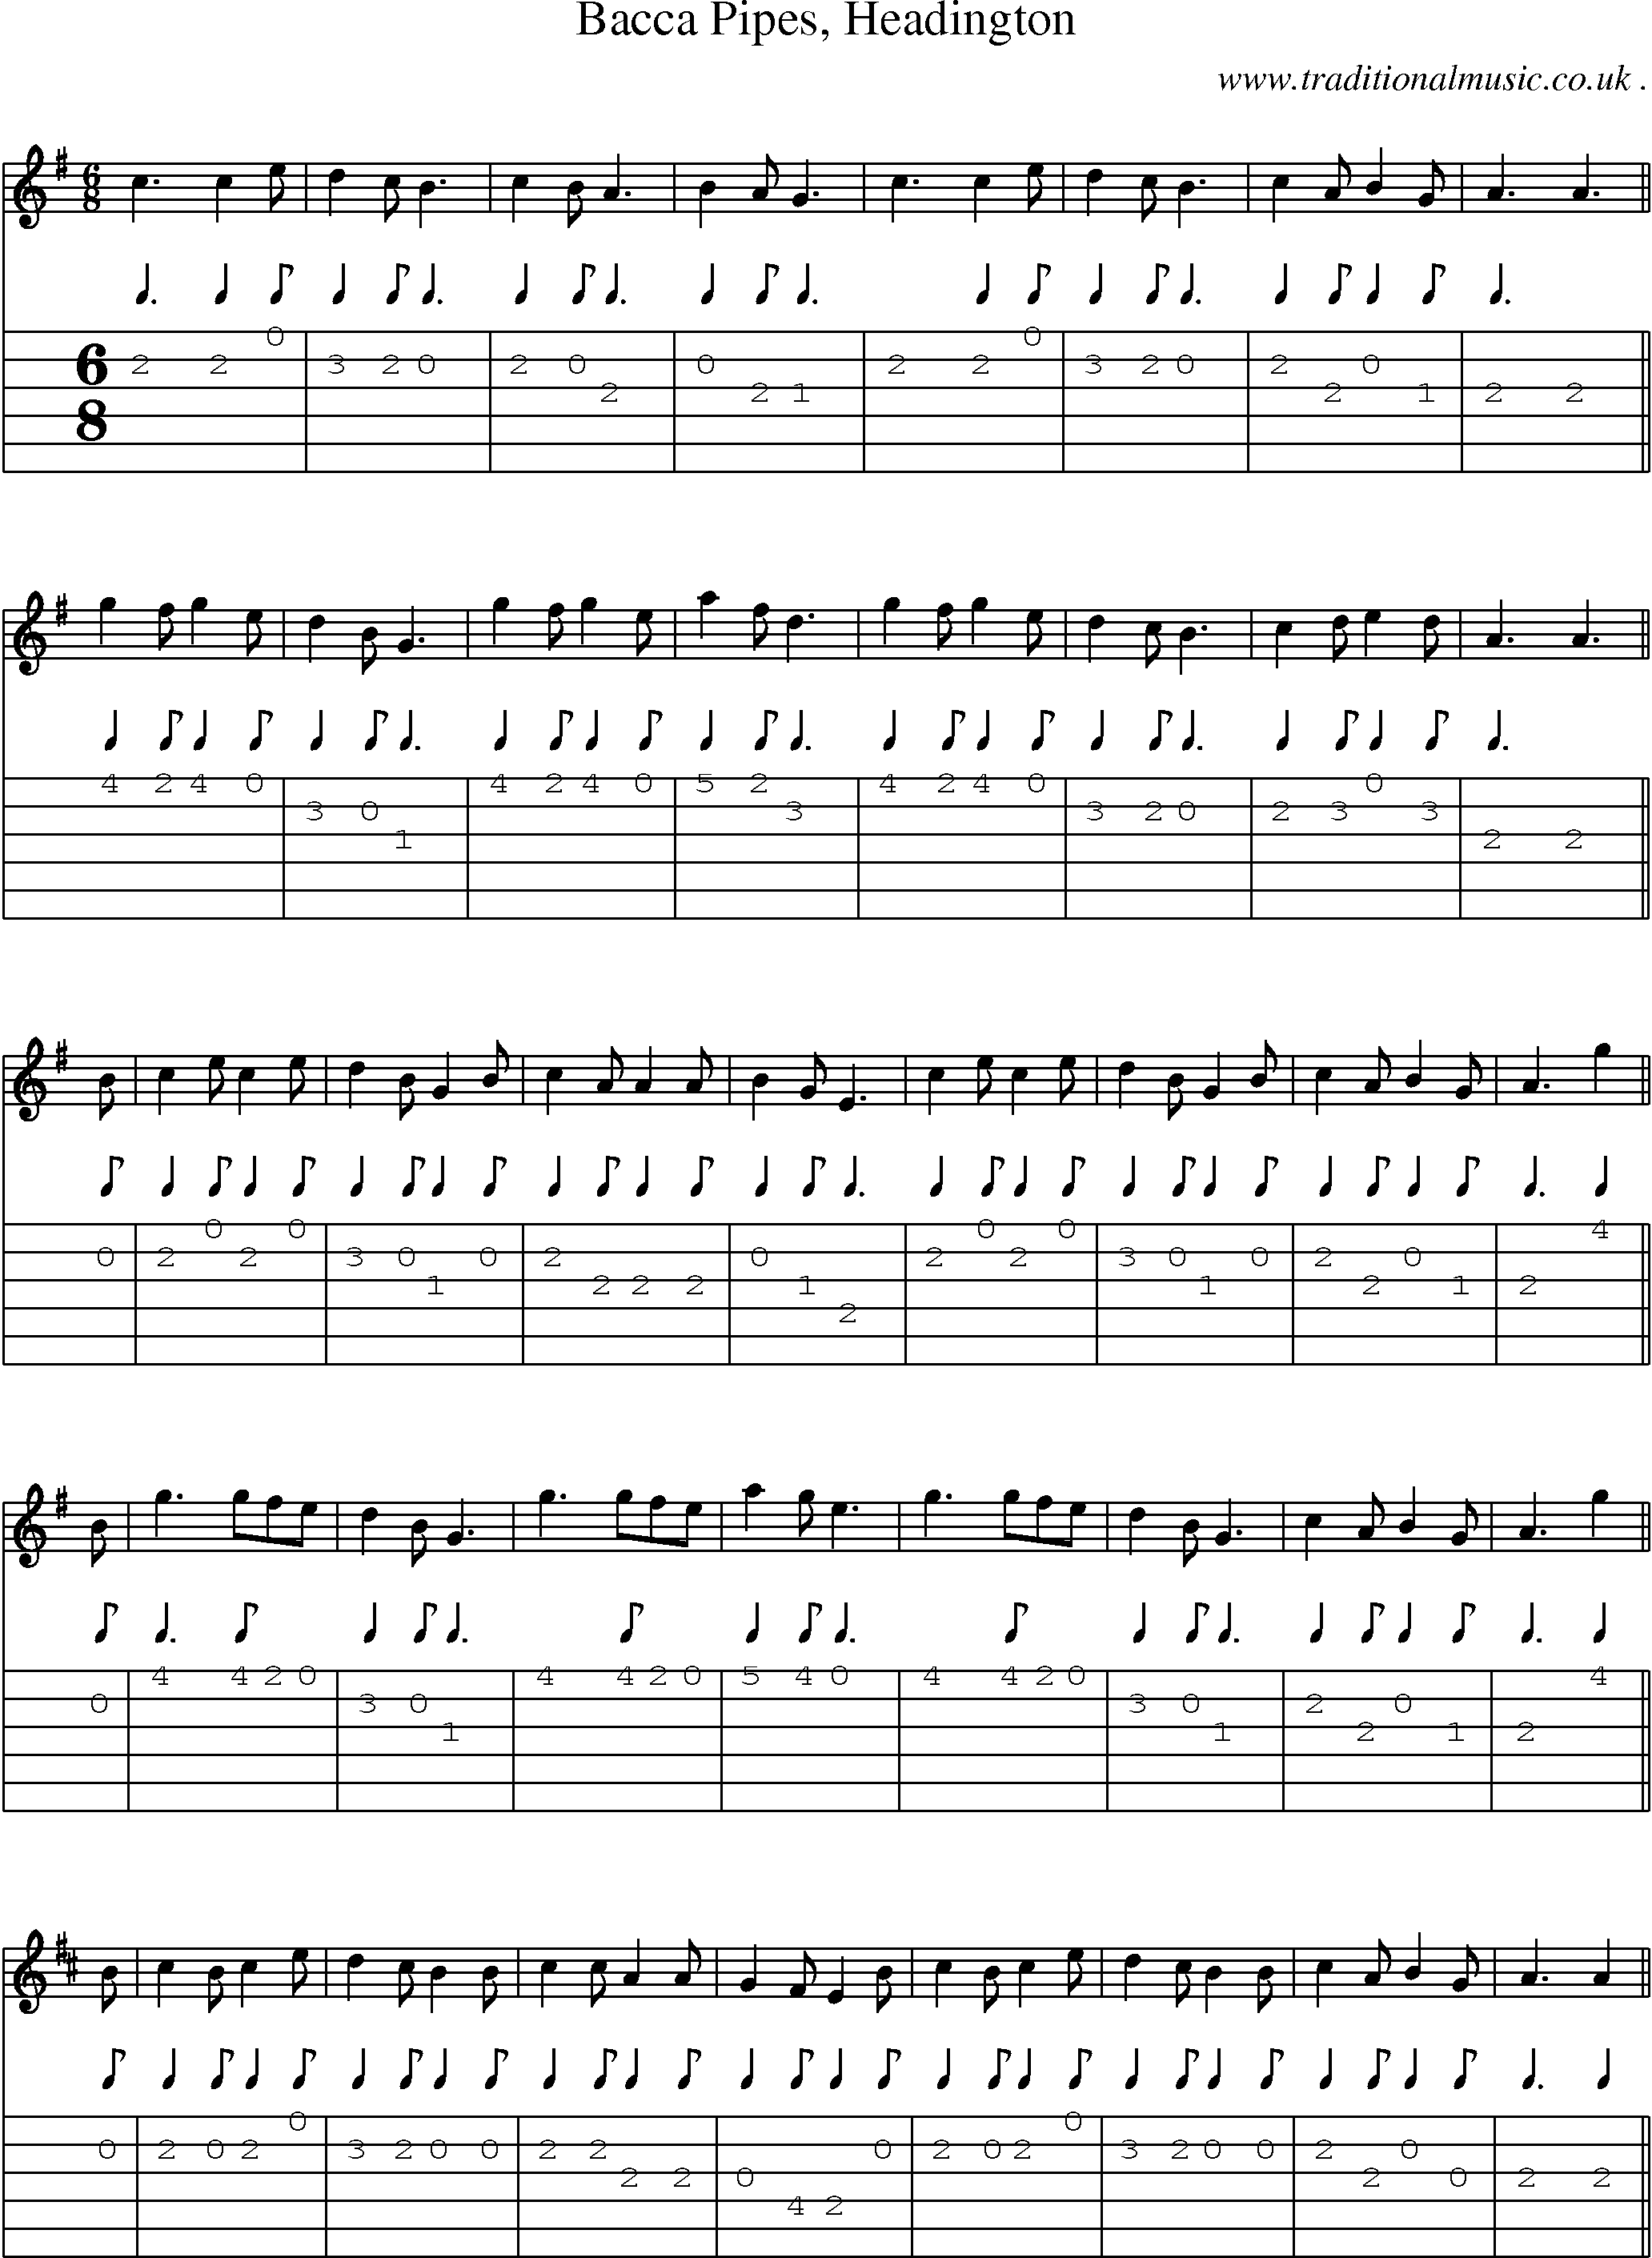 Sheet-Music and Guitar Tabs for Bacca Pipes Headington